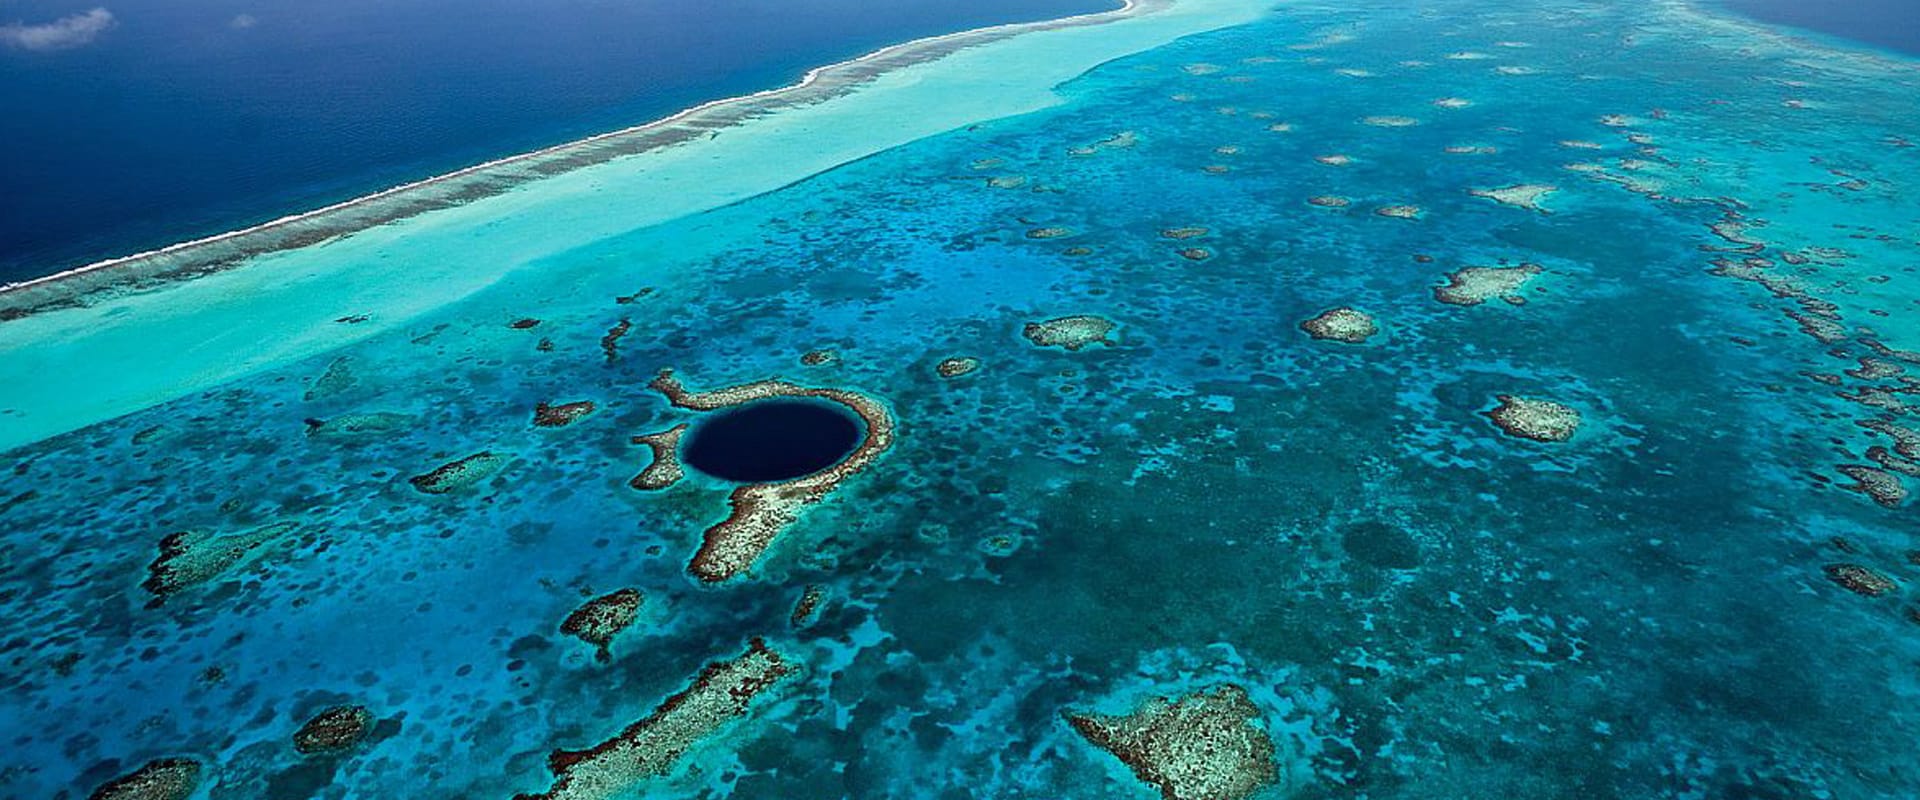 Aerial over Belize's Great Blue Hole